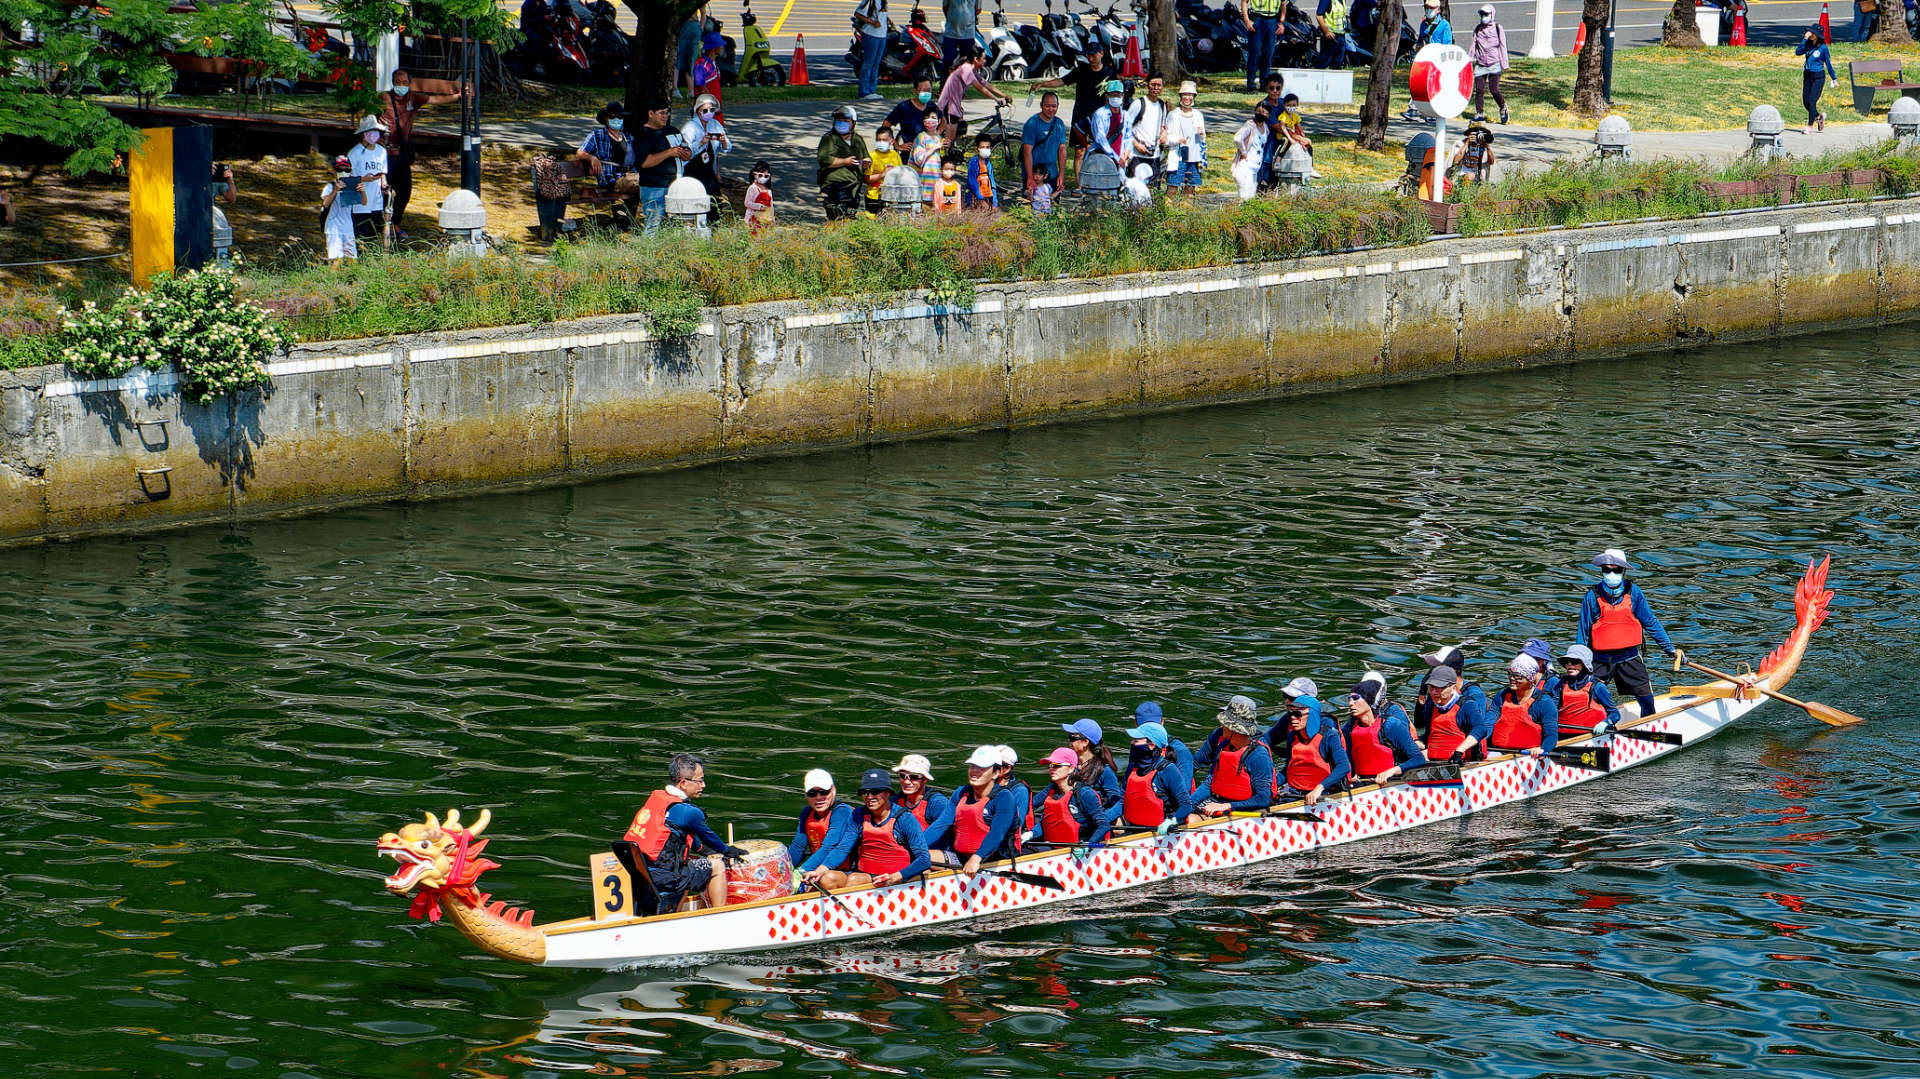 A relaxed dragon boat crew paddling past spectators after a race.